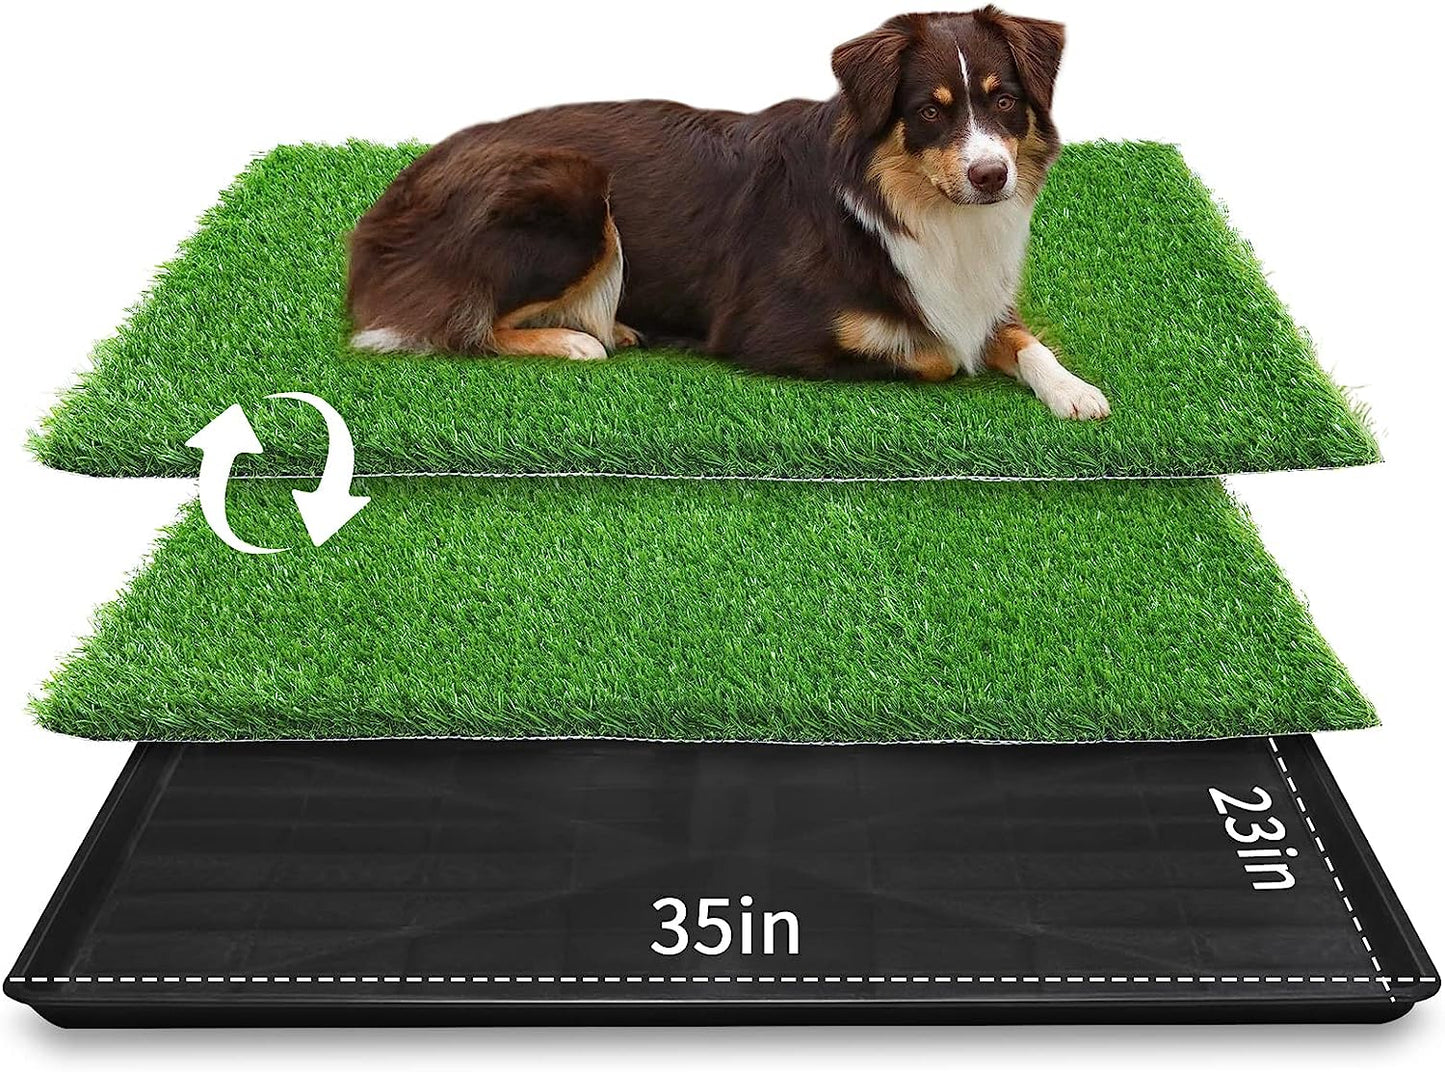 35in x 23in Extra Large Grass Porch Potty Tray, 2-Pack Replacement Artificial Grass Puppy Training Pads